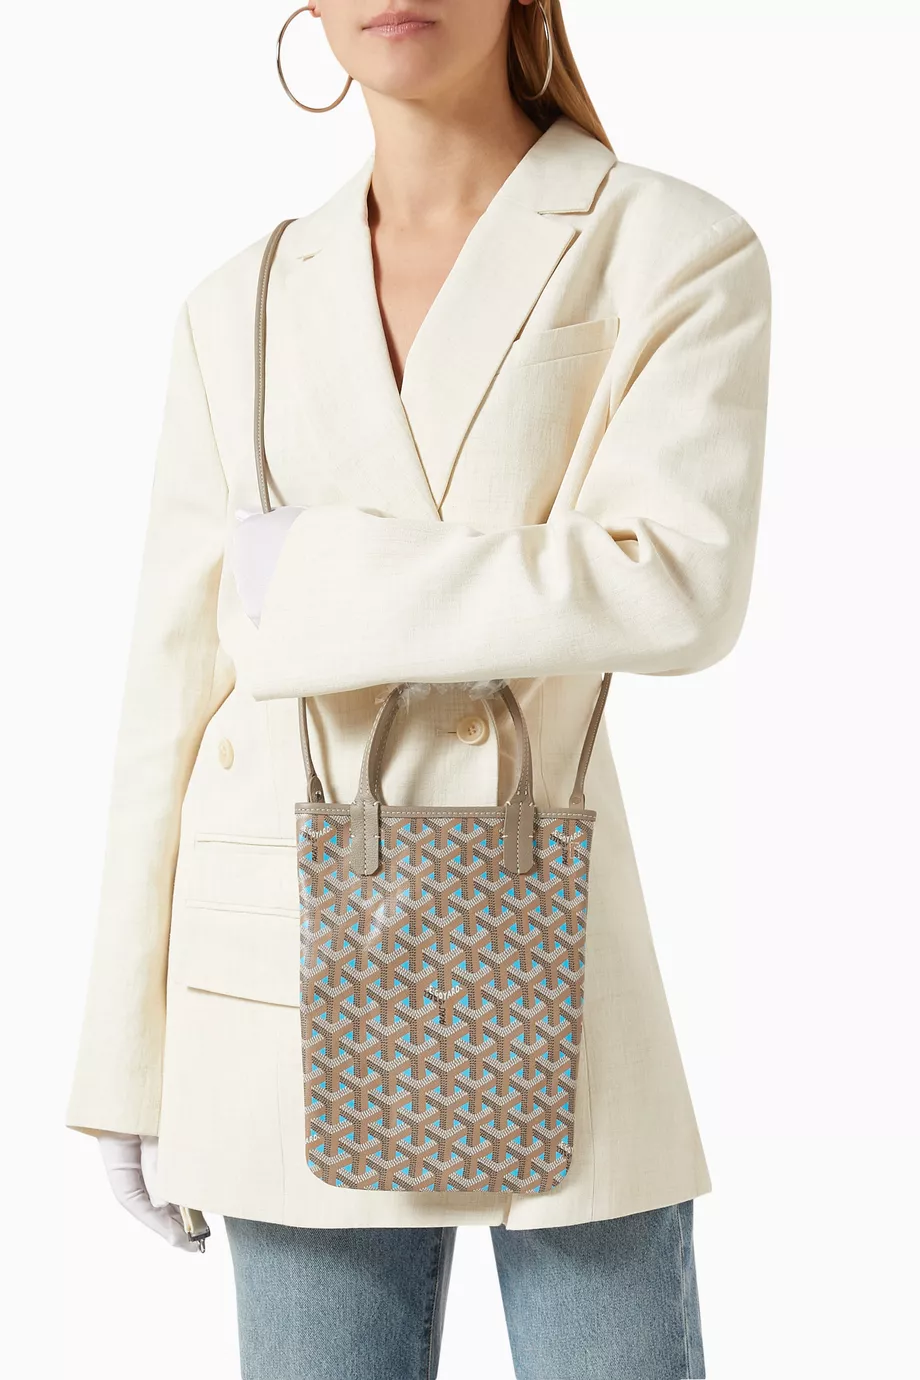 Buy Goyard Pre-Loved White Unused Limited Edition Sac Poitiers